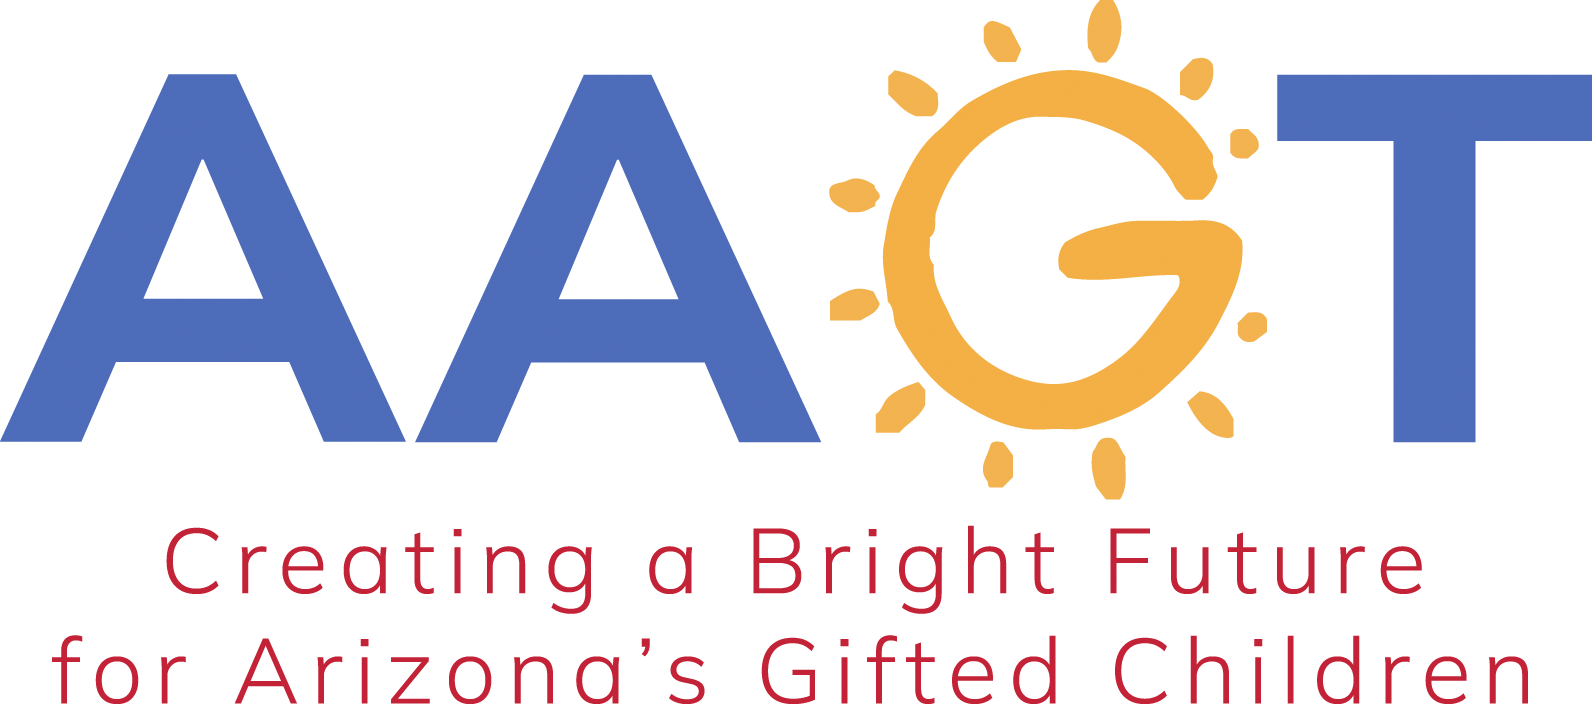 A logo for aagt creating a bright future for arizona 's gifted children